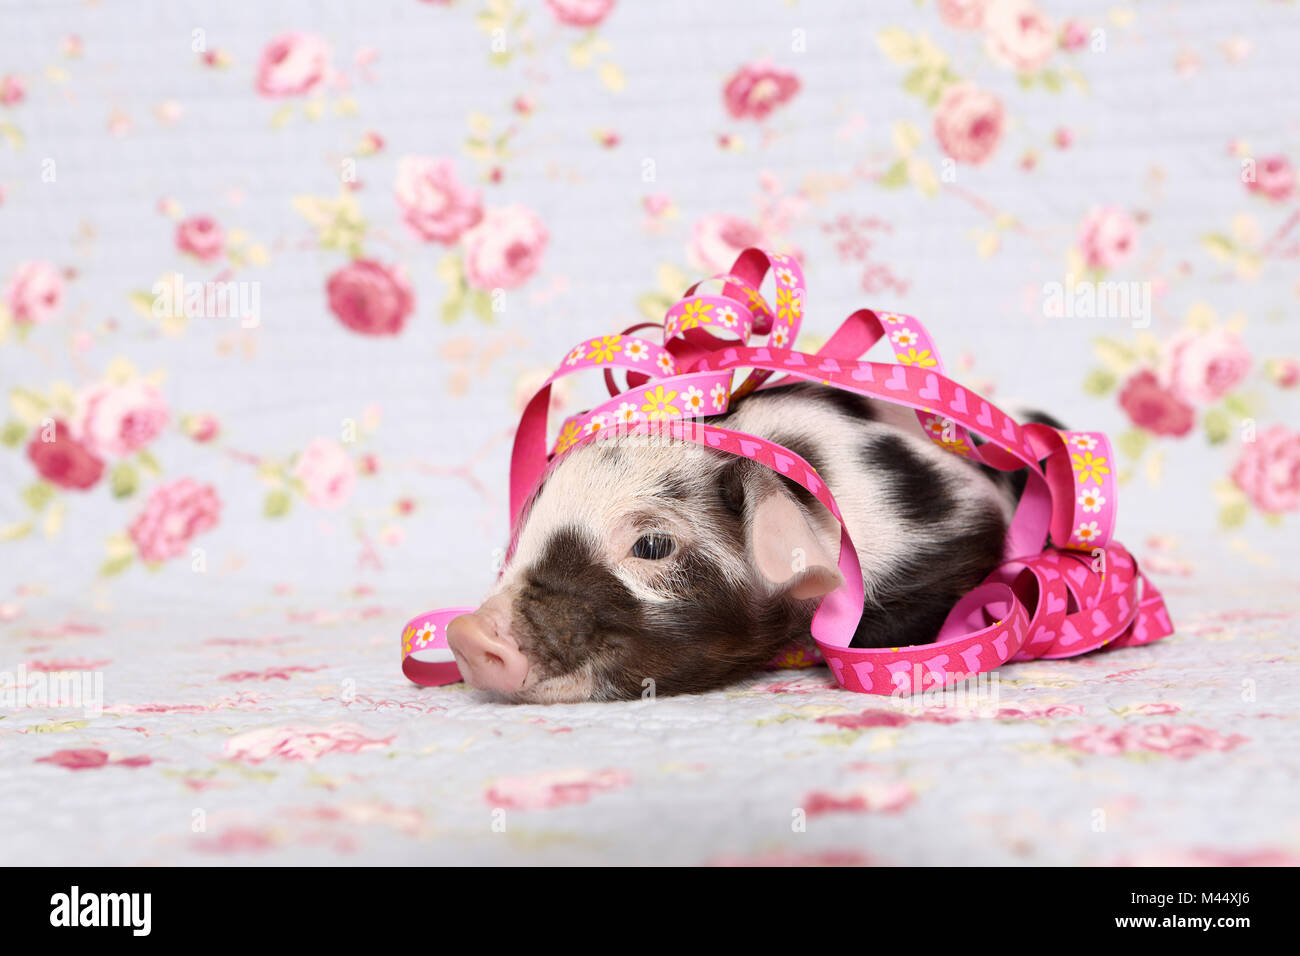 Domestic Pig, Turopolje x ?. Piglet (1 week old) with paper streamers, lying. Studio picture against a blue background with rose flower print. Germany Stock Photo